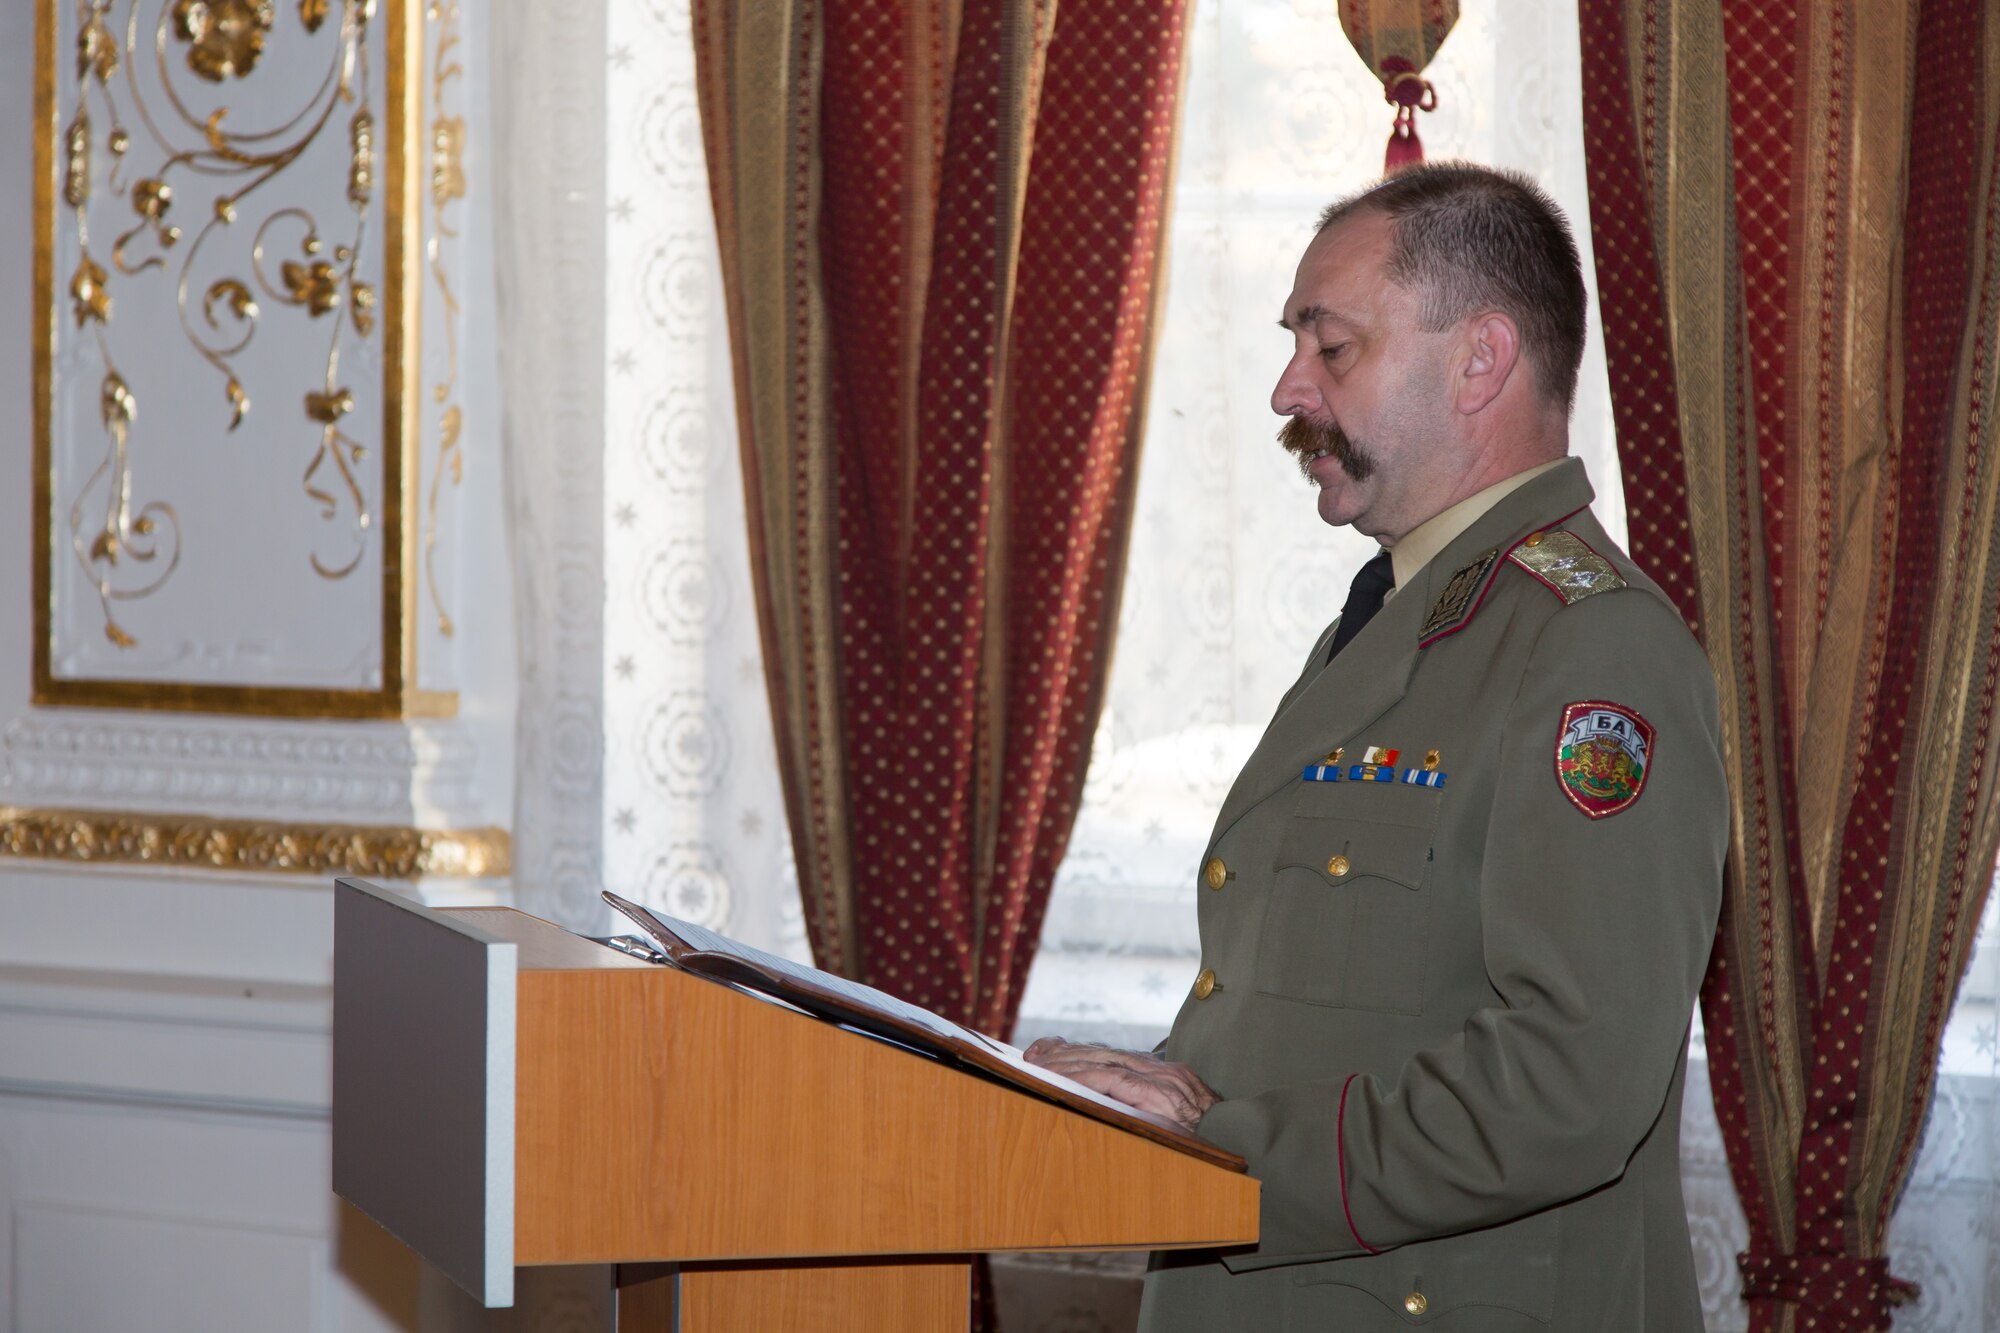 Maj. Gen. Todor Dotchev, Commander Bulgarian Rakovski Defense Staff College, addresses students from the first ever IEAFA combined international officer and NCO PME course graduation held in Sofia, Bulgaria, Nov.13, 2015.  Bulgaria partnered with the U.S. to co-host the inaugural course which included twenty-three students from Bulgaria, Czech Republic, Estonia, and Hungary participated in this inagural course. (U.S. Air Force photo/SMSgt Travis Robbins/Released)